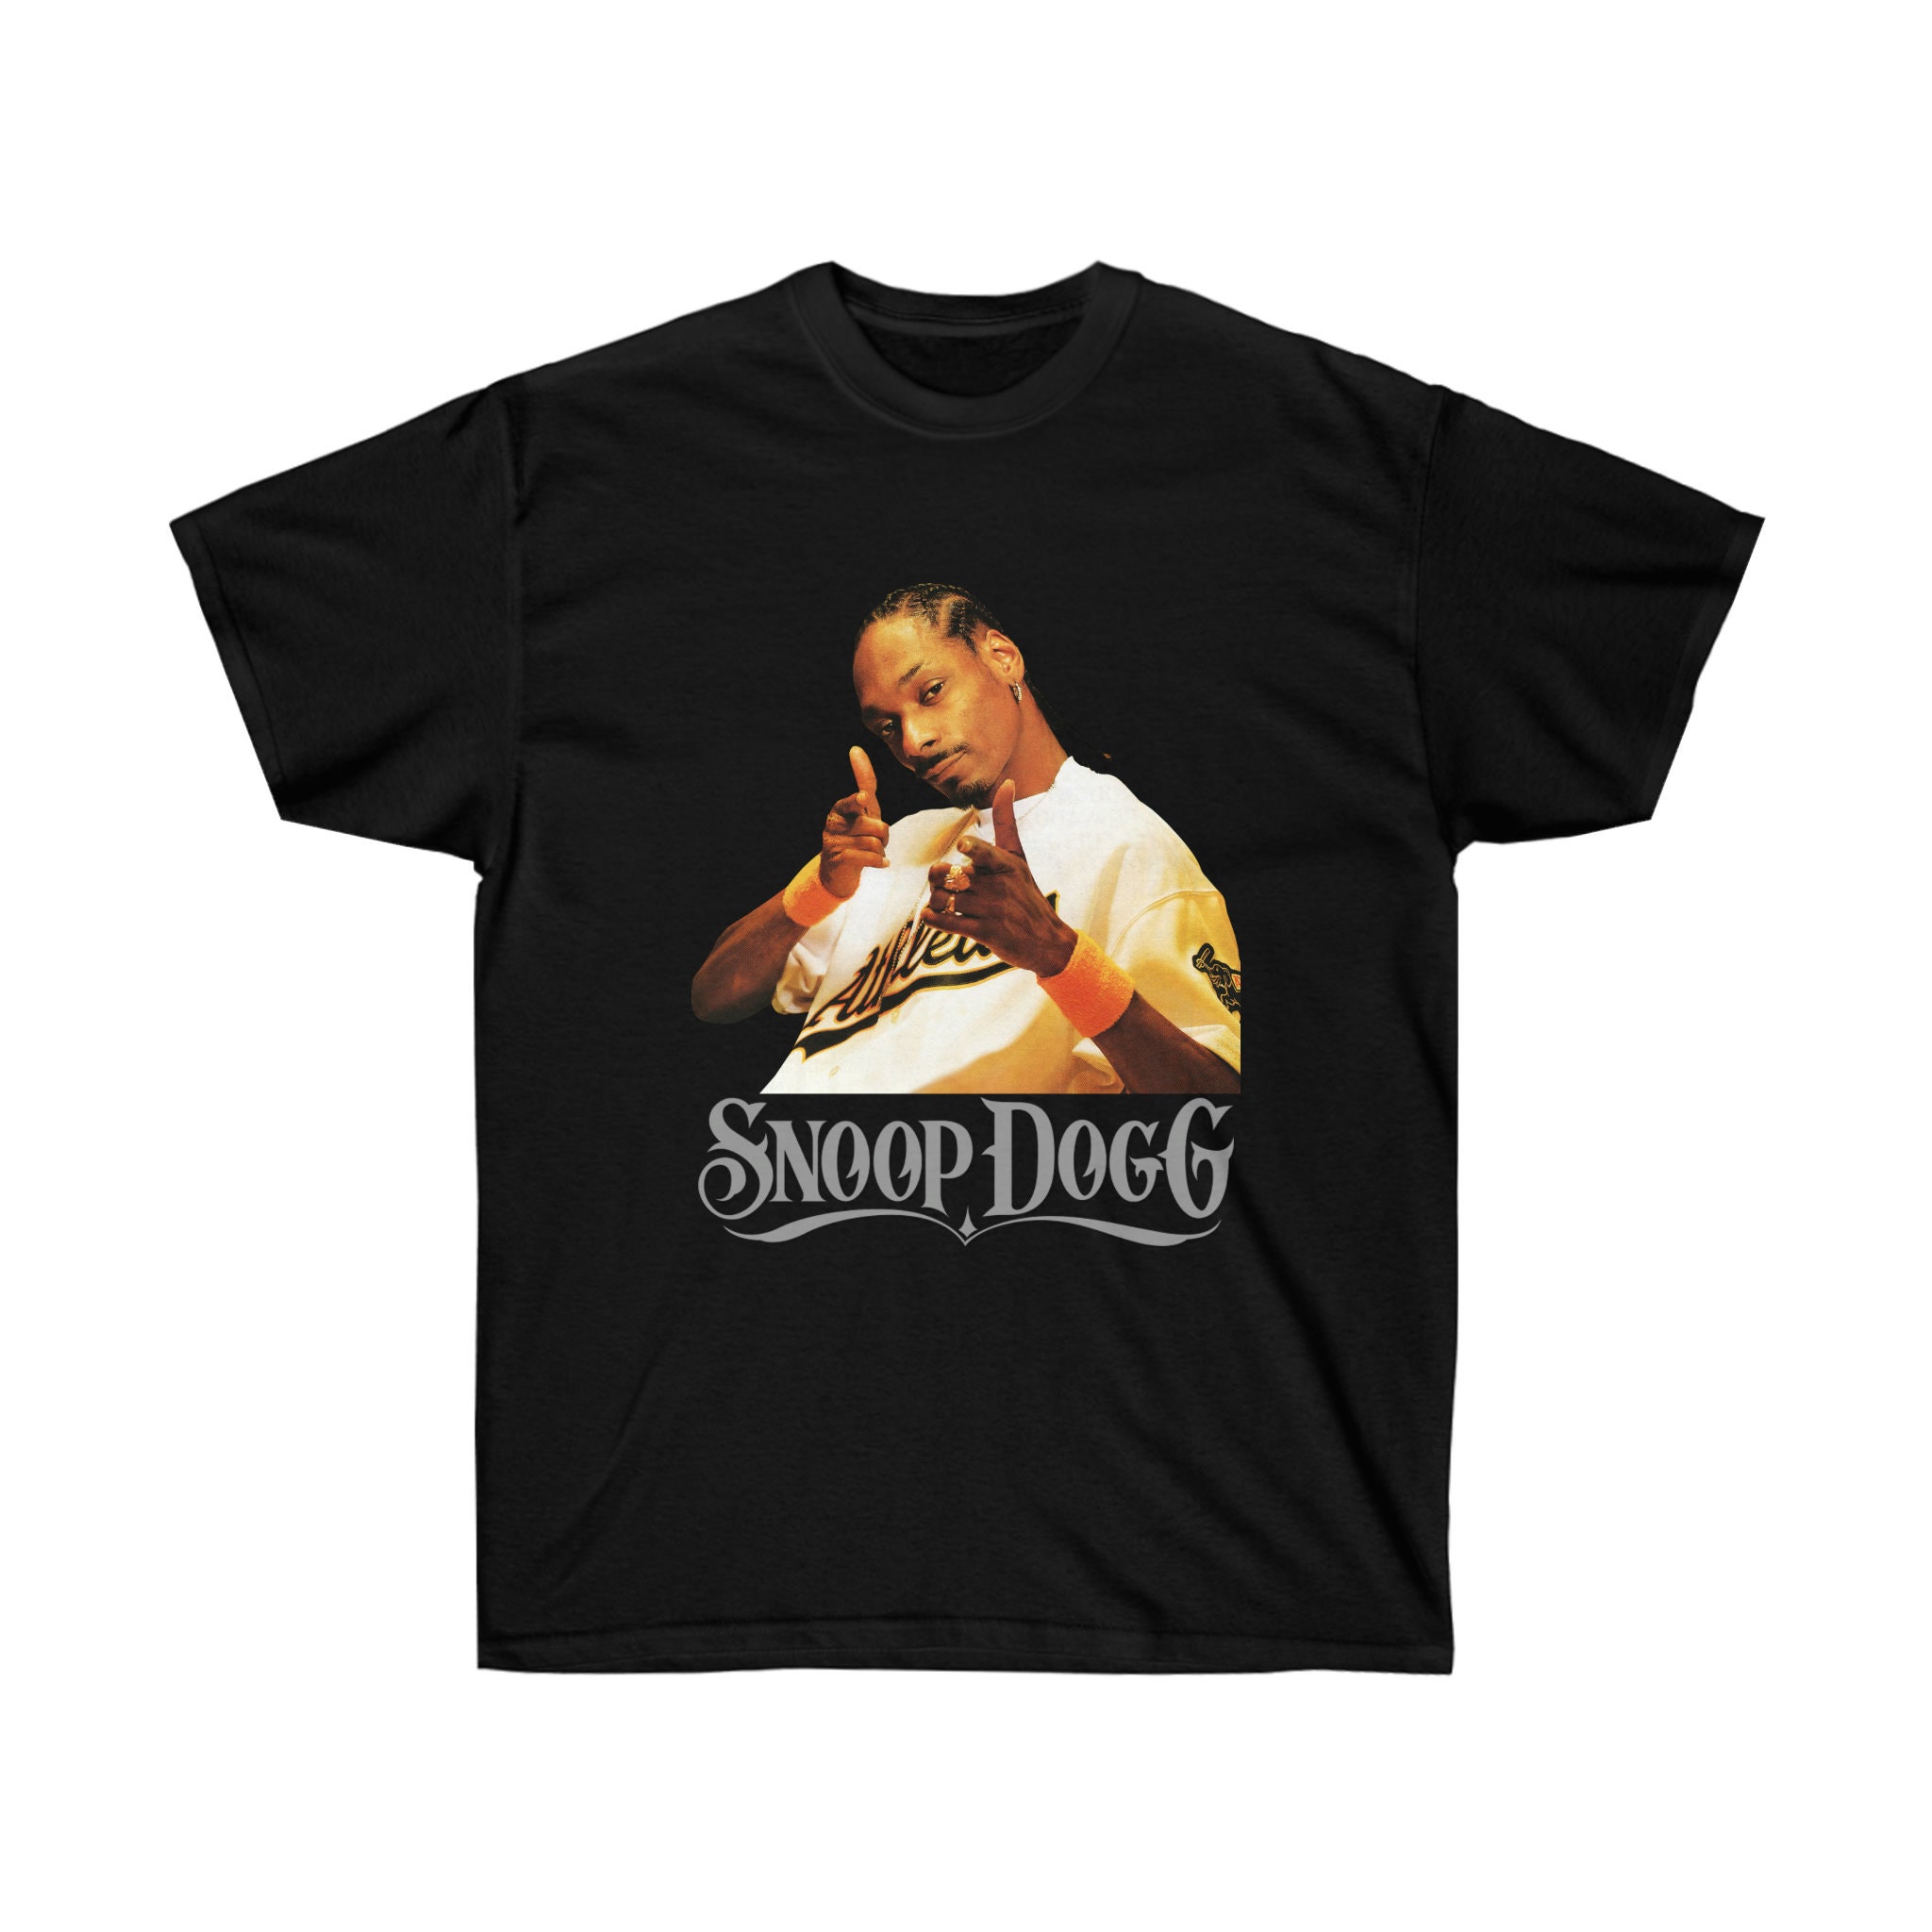 Discover Snoop Dogg Graphic T-Shirt